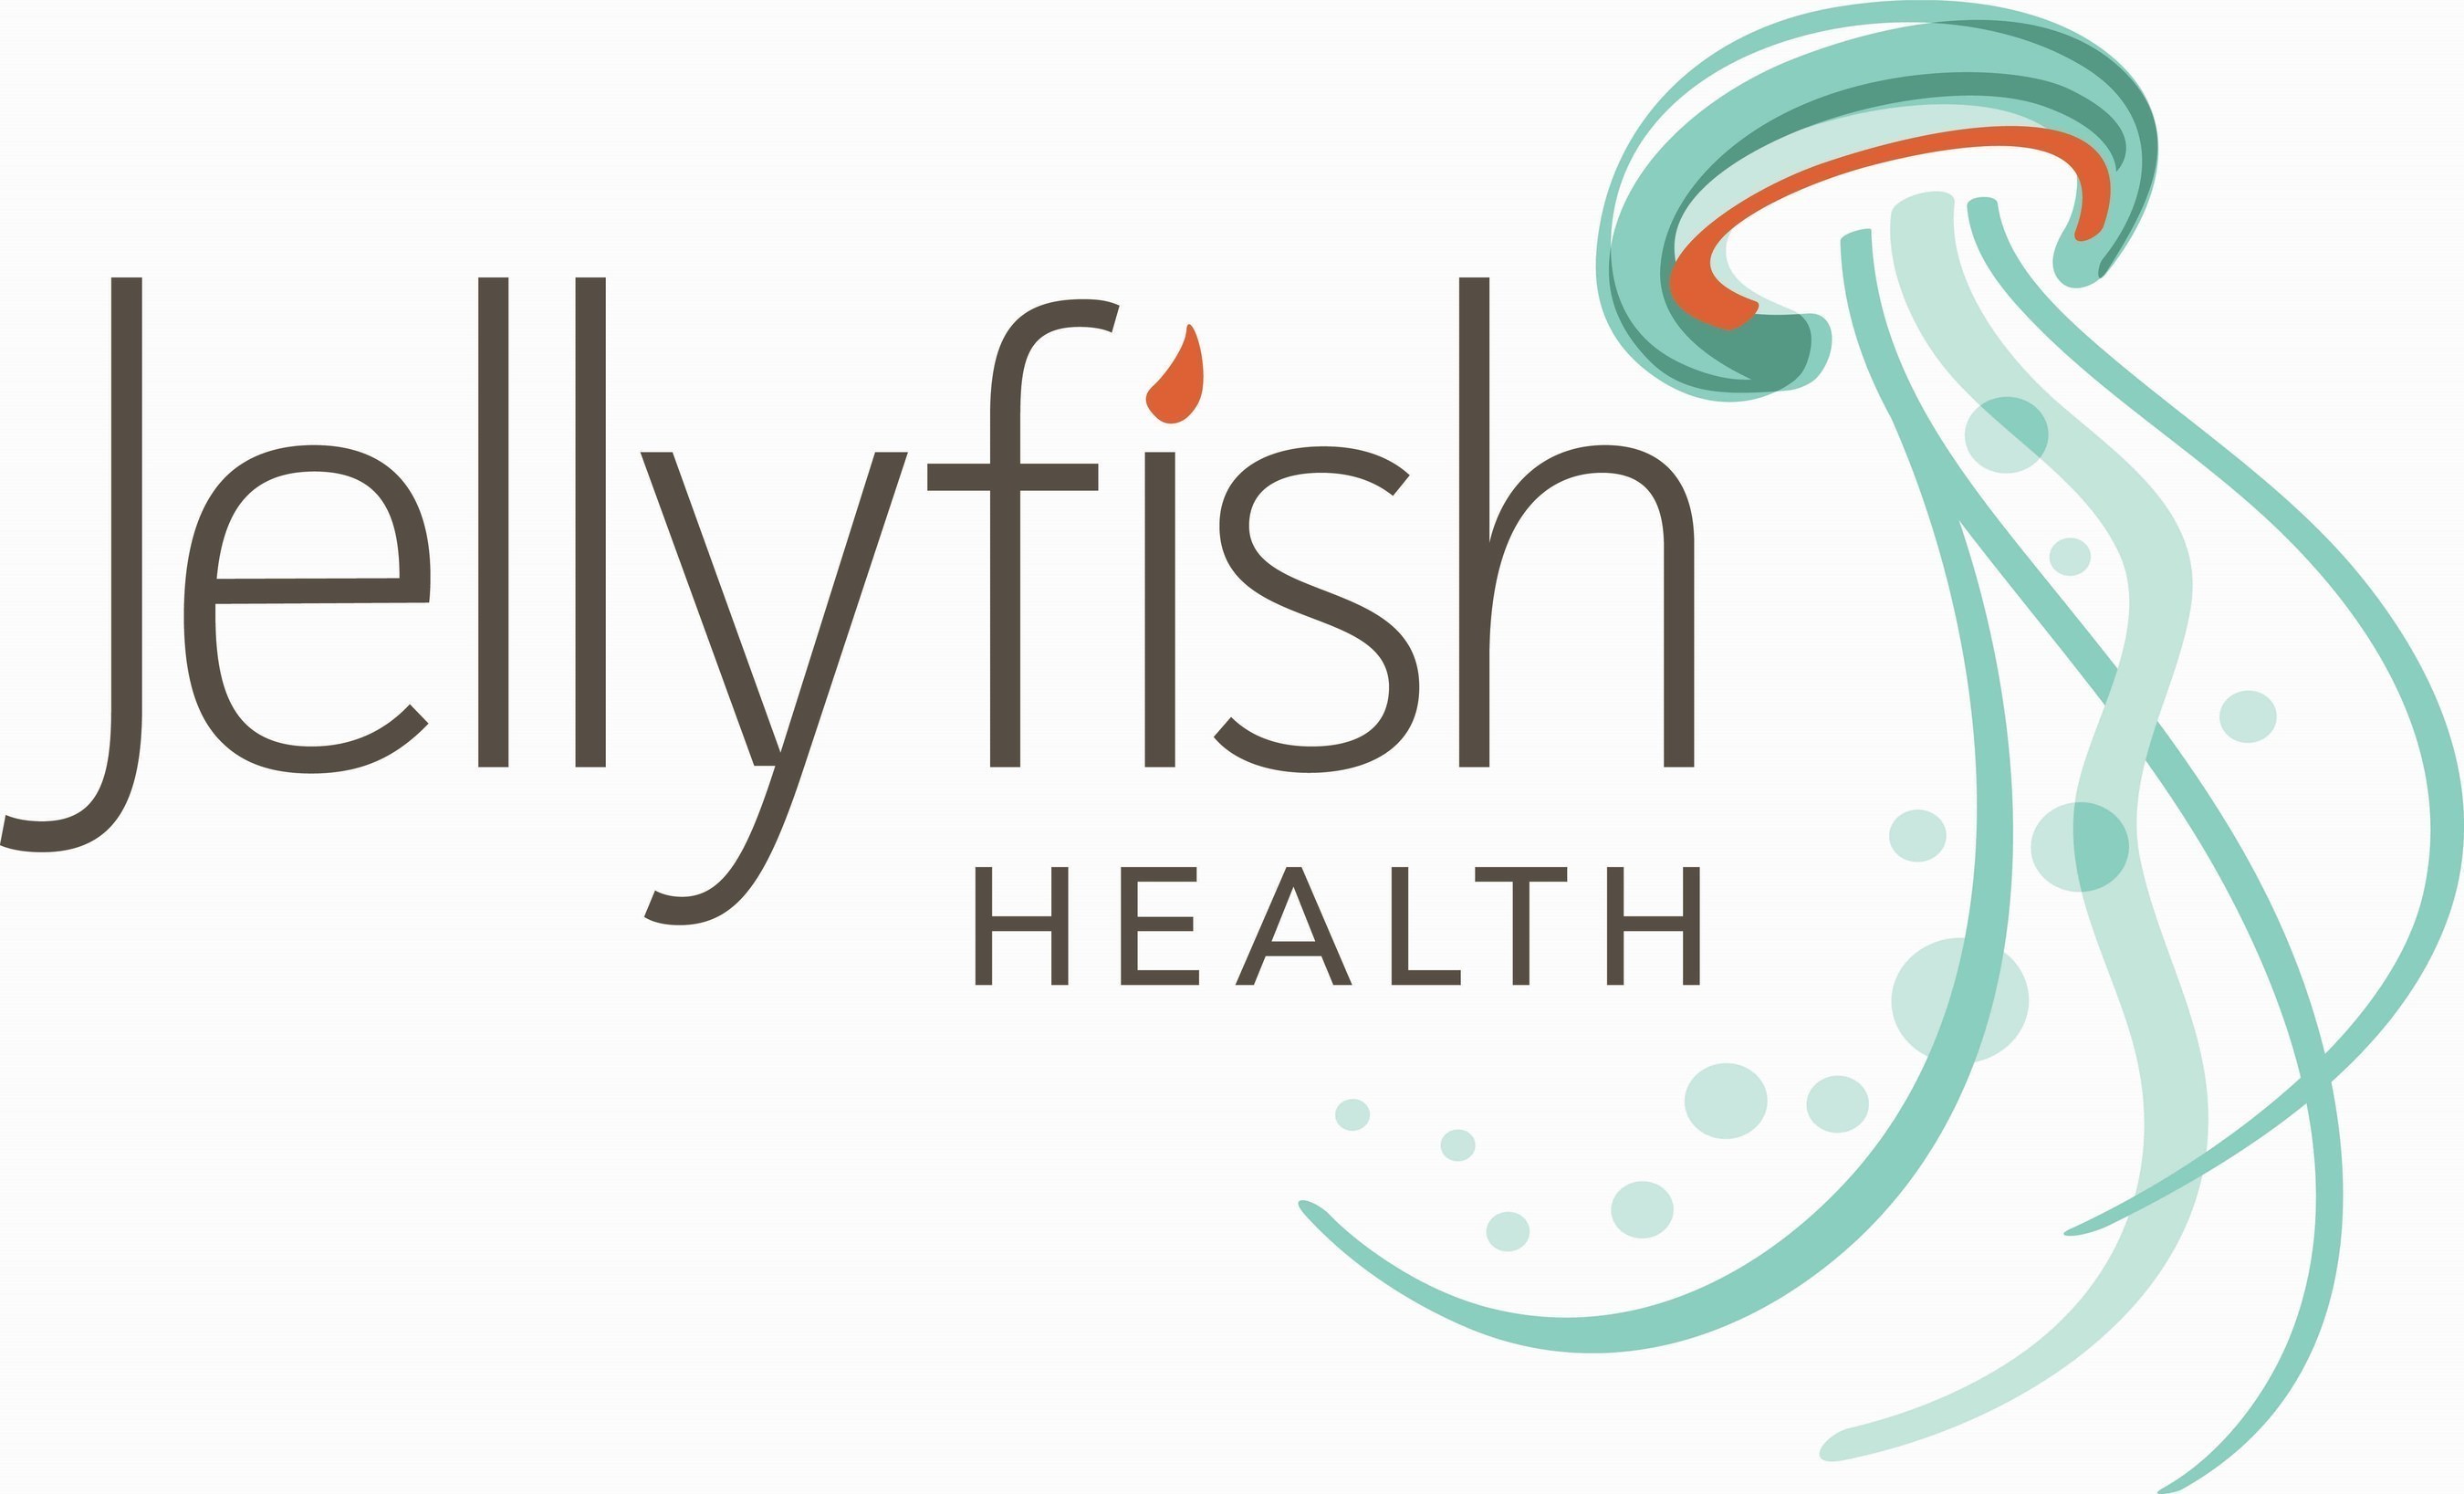 Jellyfish Health is passionate about reducing wait times and enhancing the overall patient experience. Our innovative, easy-to-use software applications empower and engage patients, putting them in control of their own experience. This results in increased patient satisfaction, volume and revenue for health care organizations. Founded in 2014 and currently deployed in health care facilities throughout the United States, Jellyfish Health is paving the way in today's patient-driven market. (PRNewsFoto/Jellyfish Health)